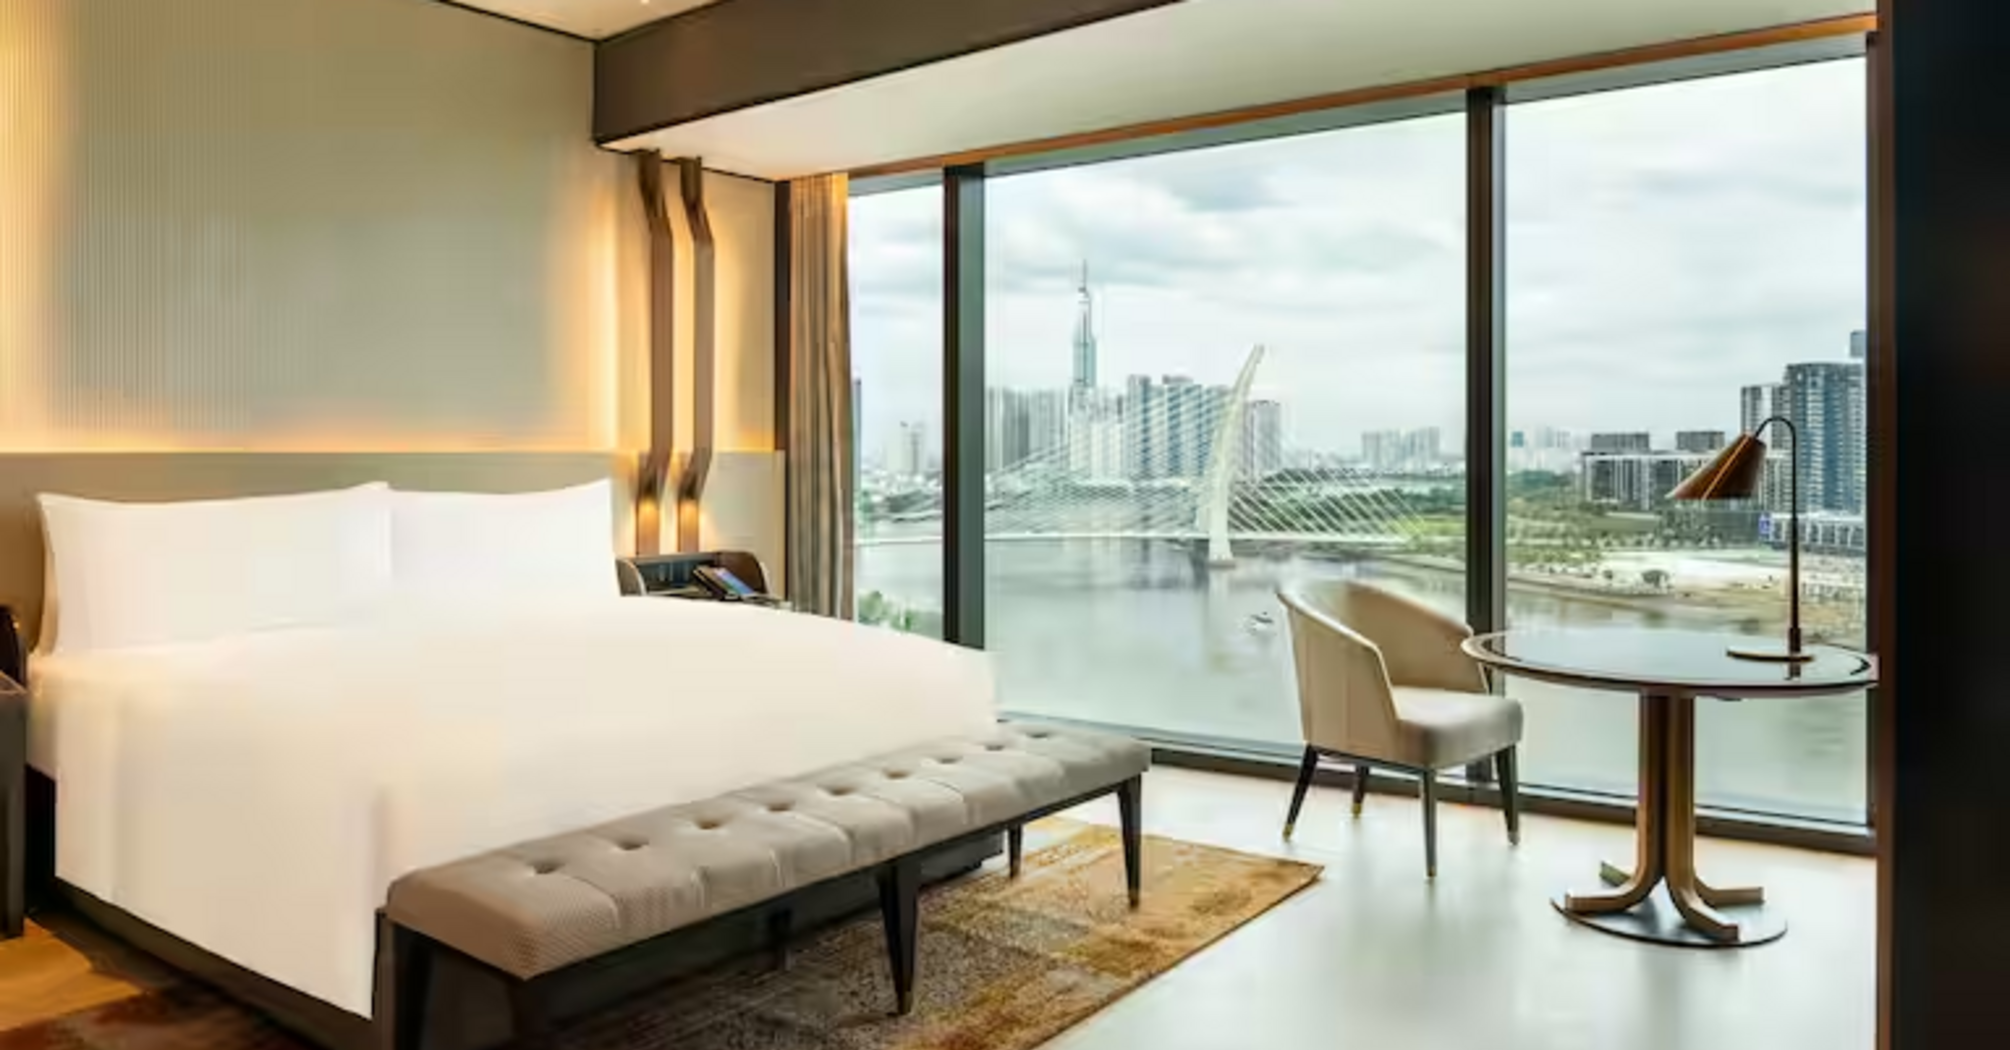 The best vacation in Vietnam starts with the Hilton Saigon hotel: what they offer to tourists